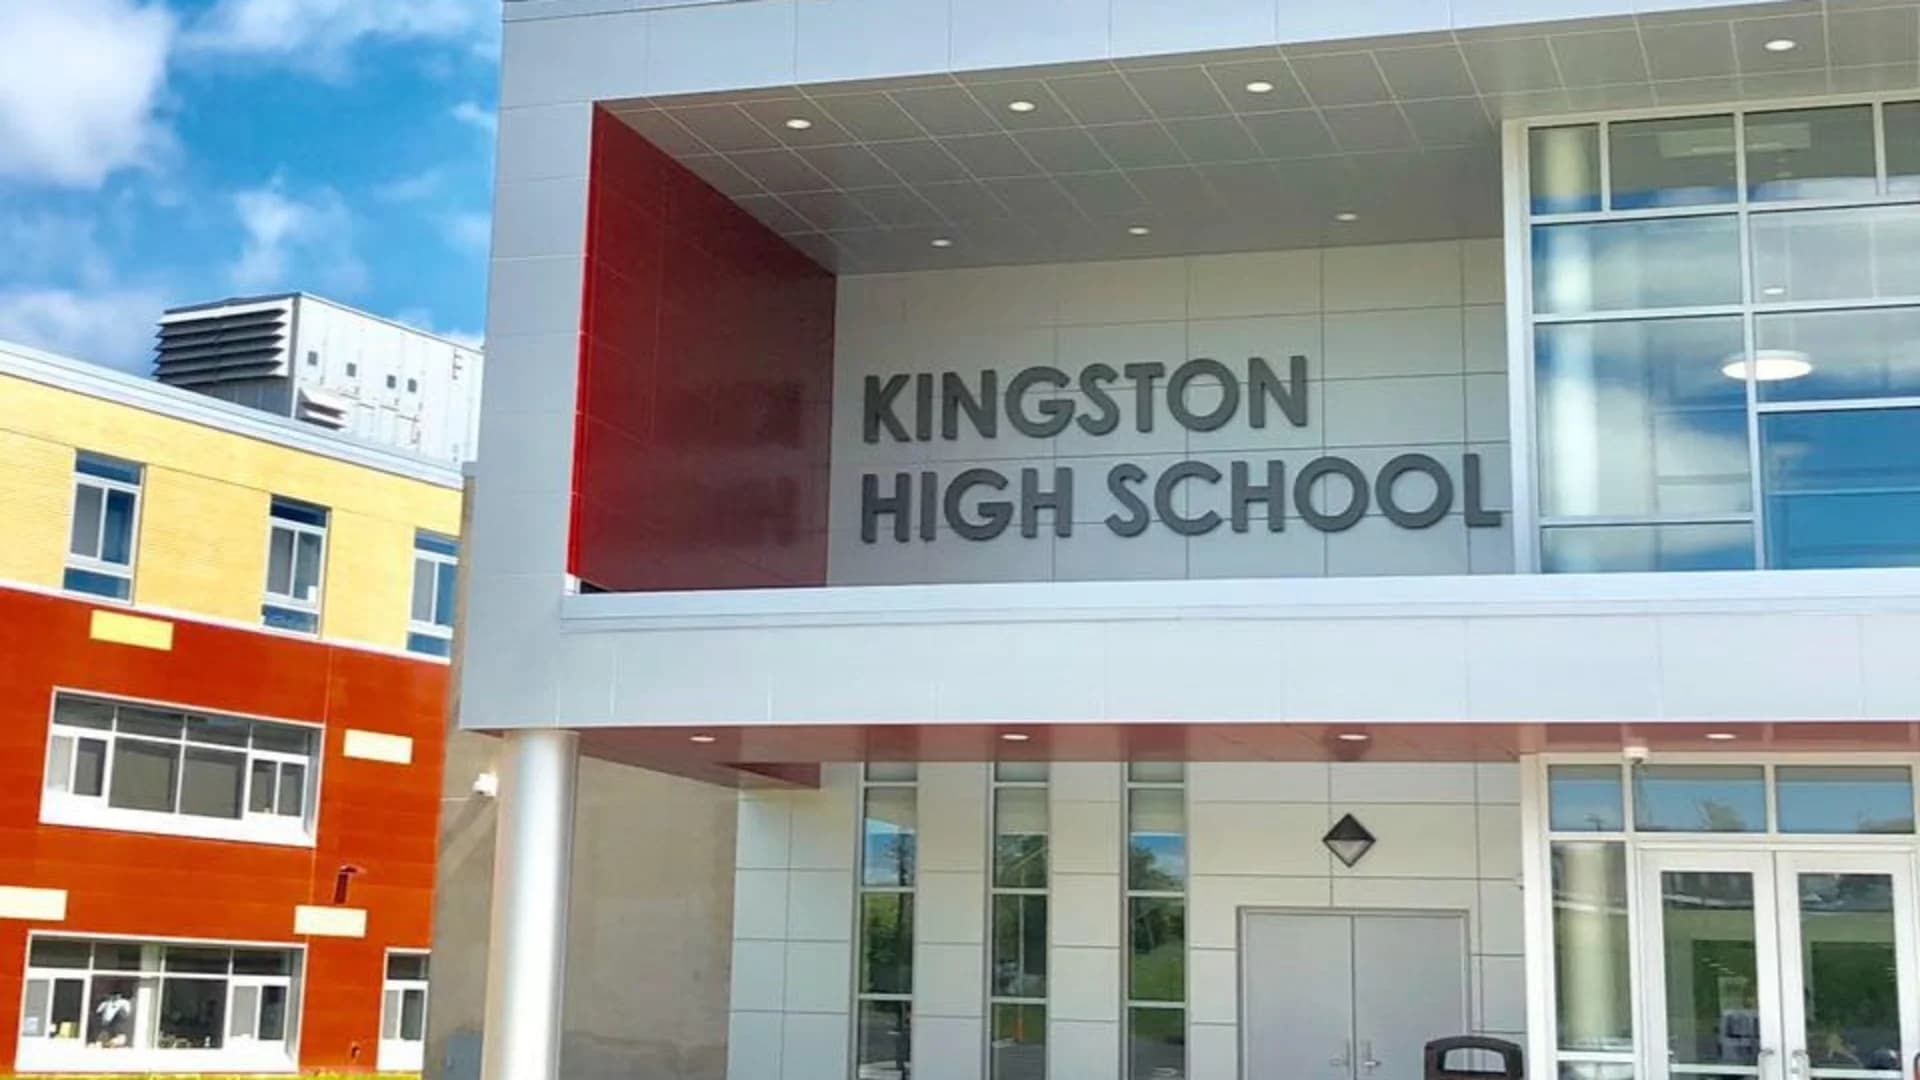 School superintendent: Kingston High School student attacked and taken to hospital with serious injuries